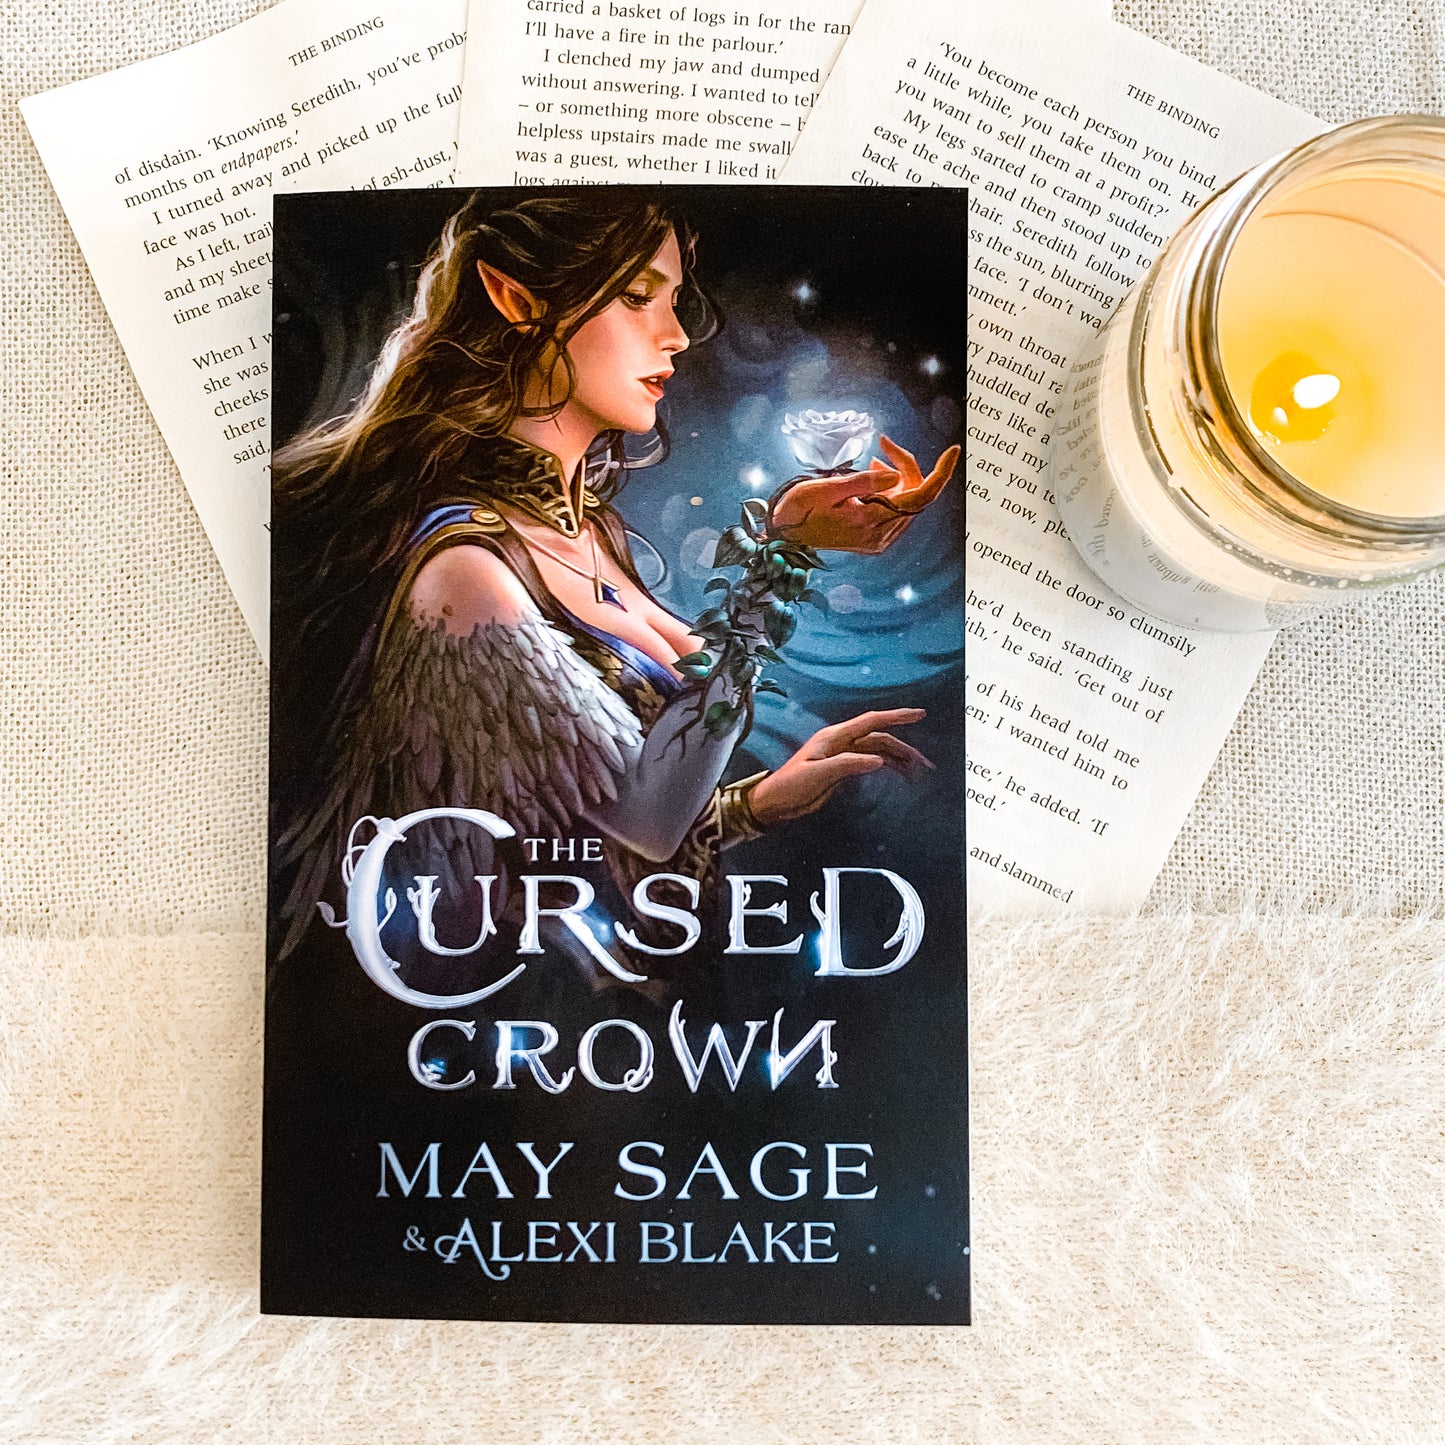 The Cursed Crown by May Sage and Alexi Blake